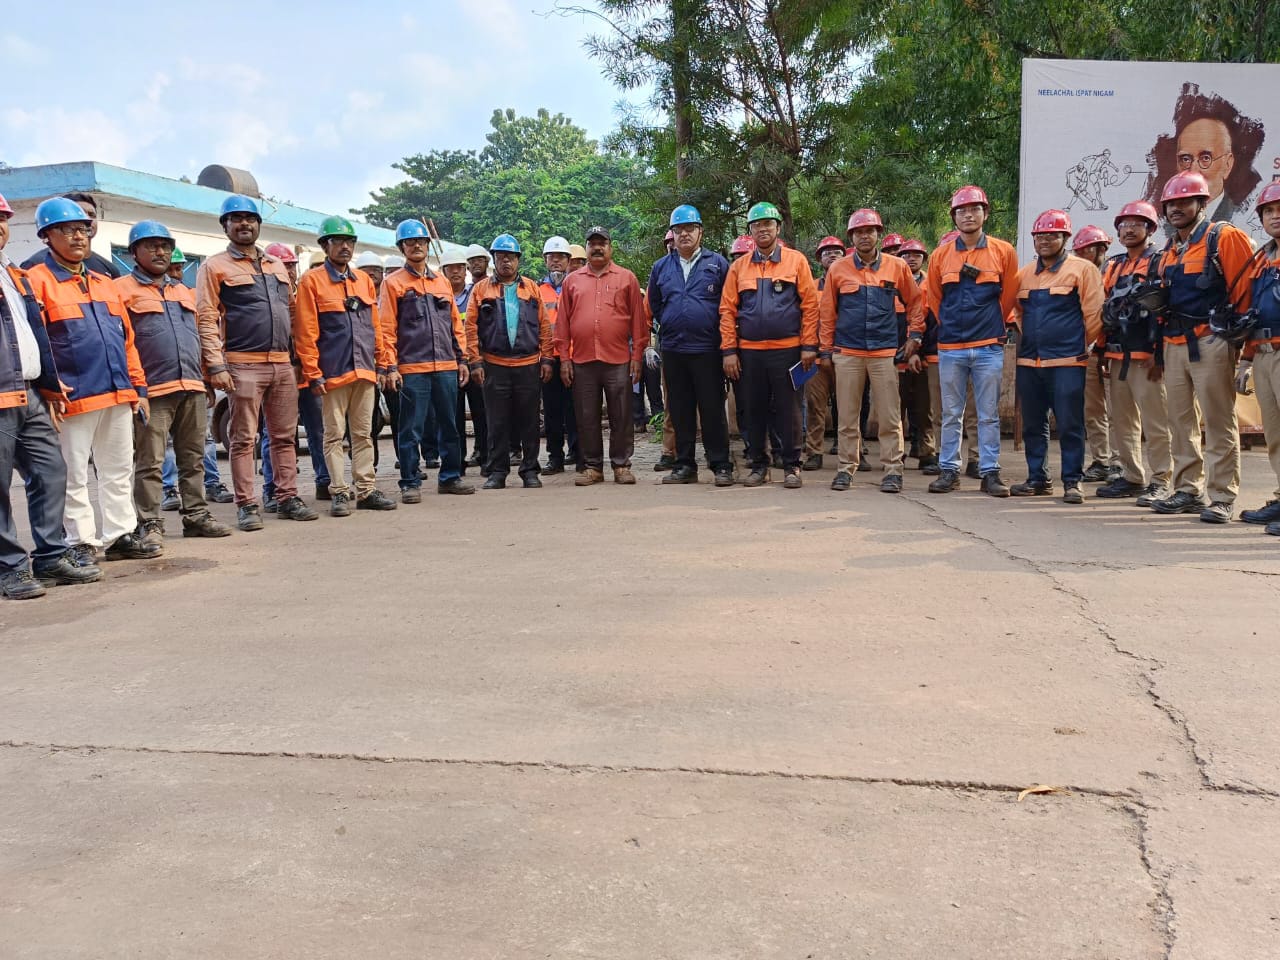 Neelachal Ispat Nigam conducts a full-scale mock drill to test